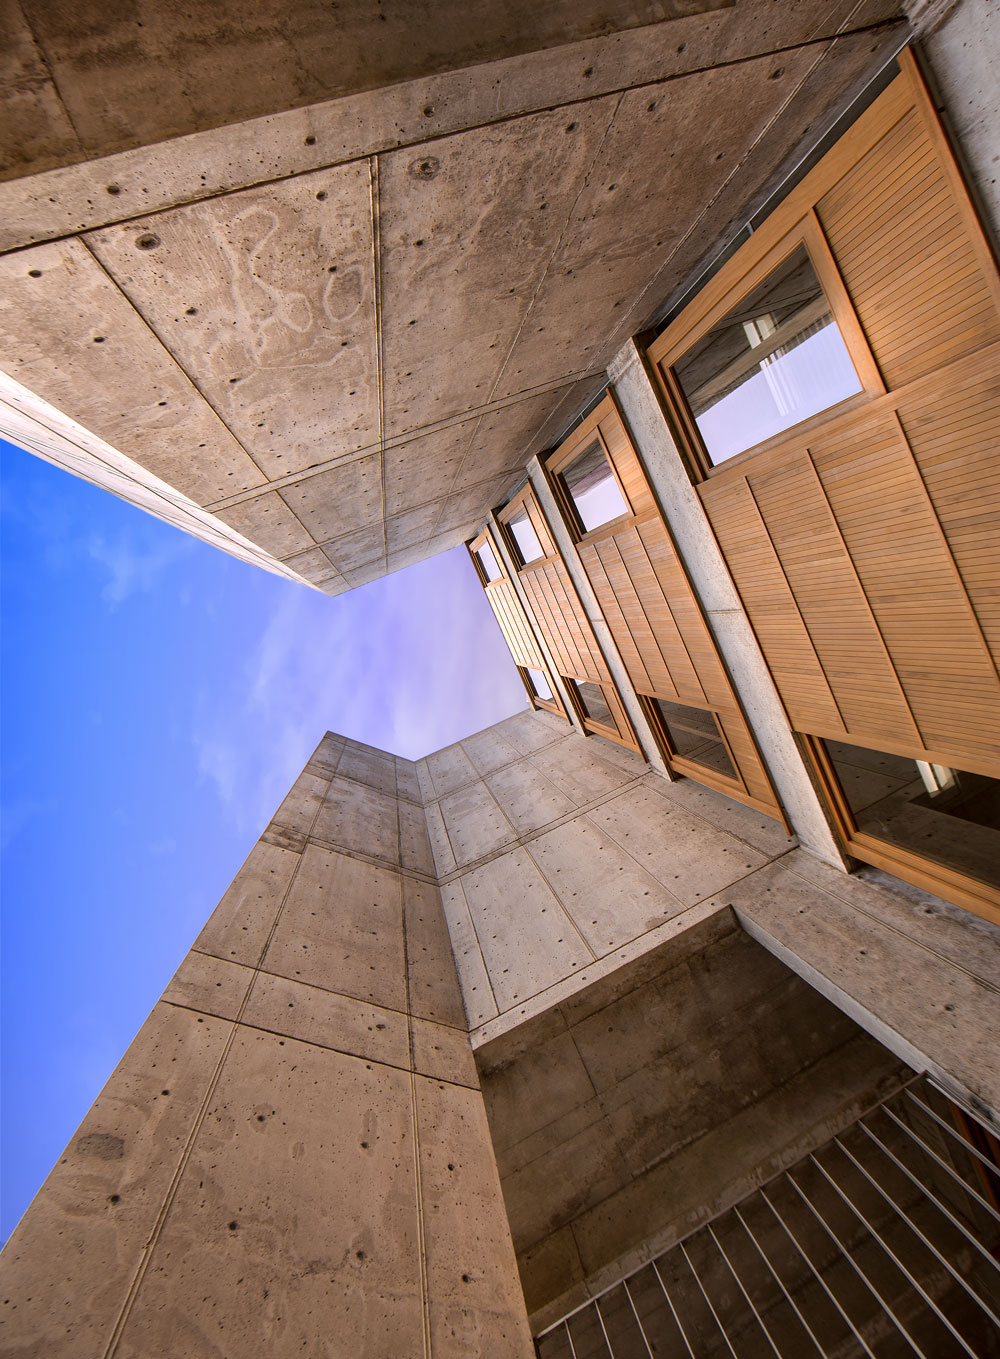 Getty Conservation Institute and Salk Institute announce